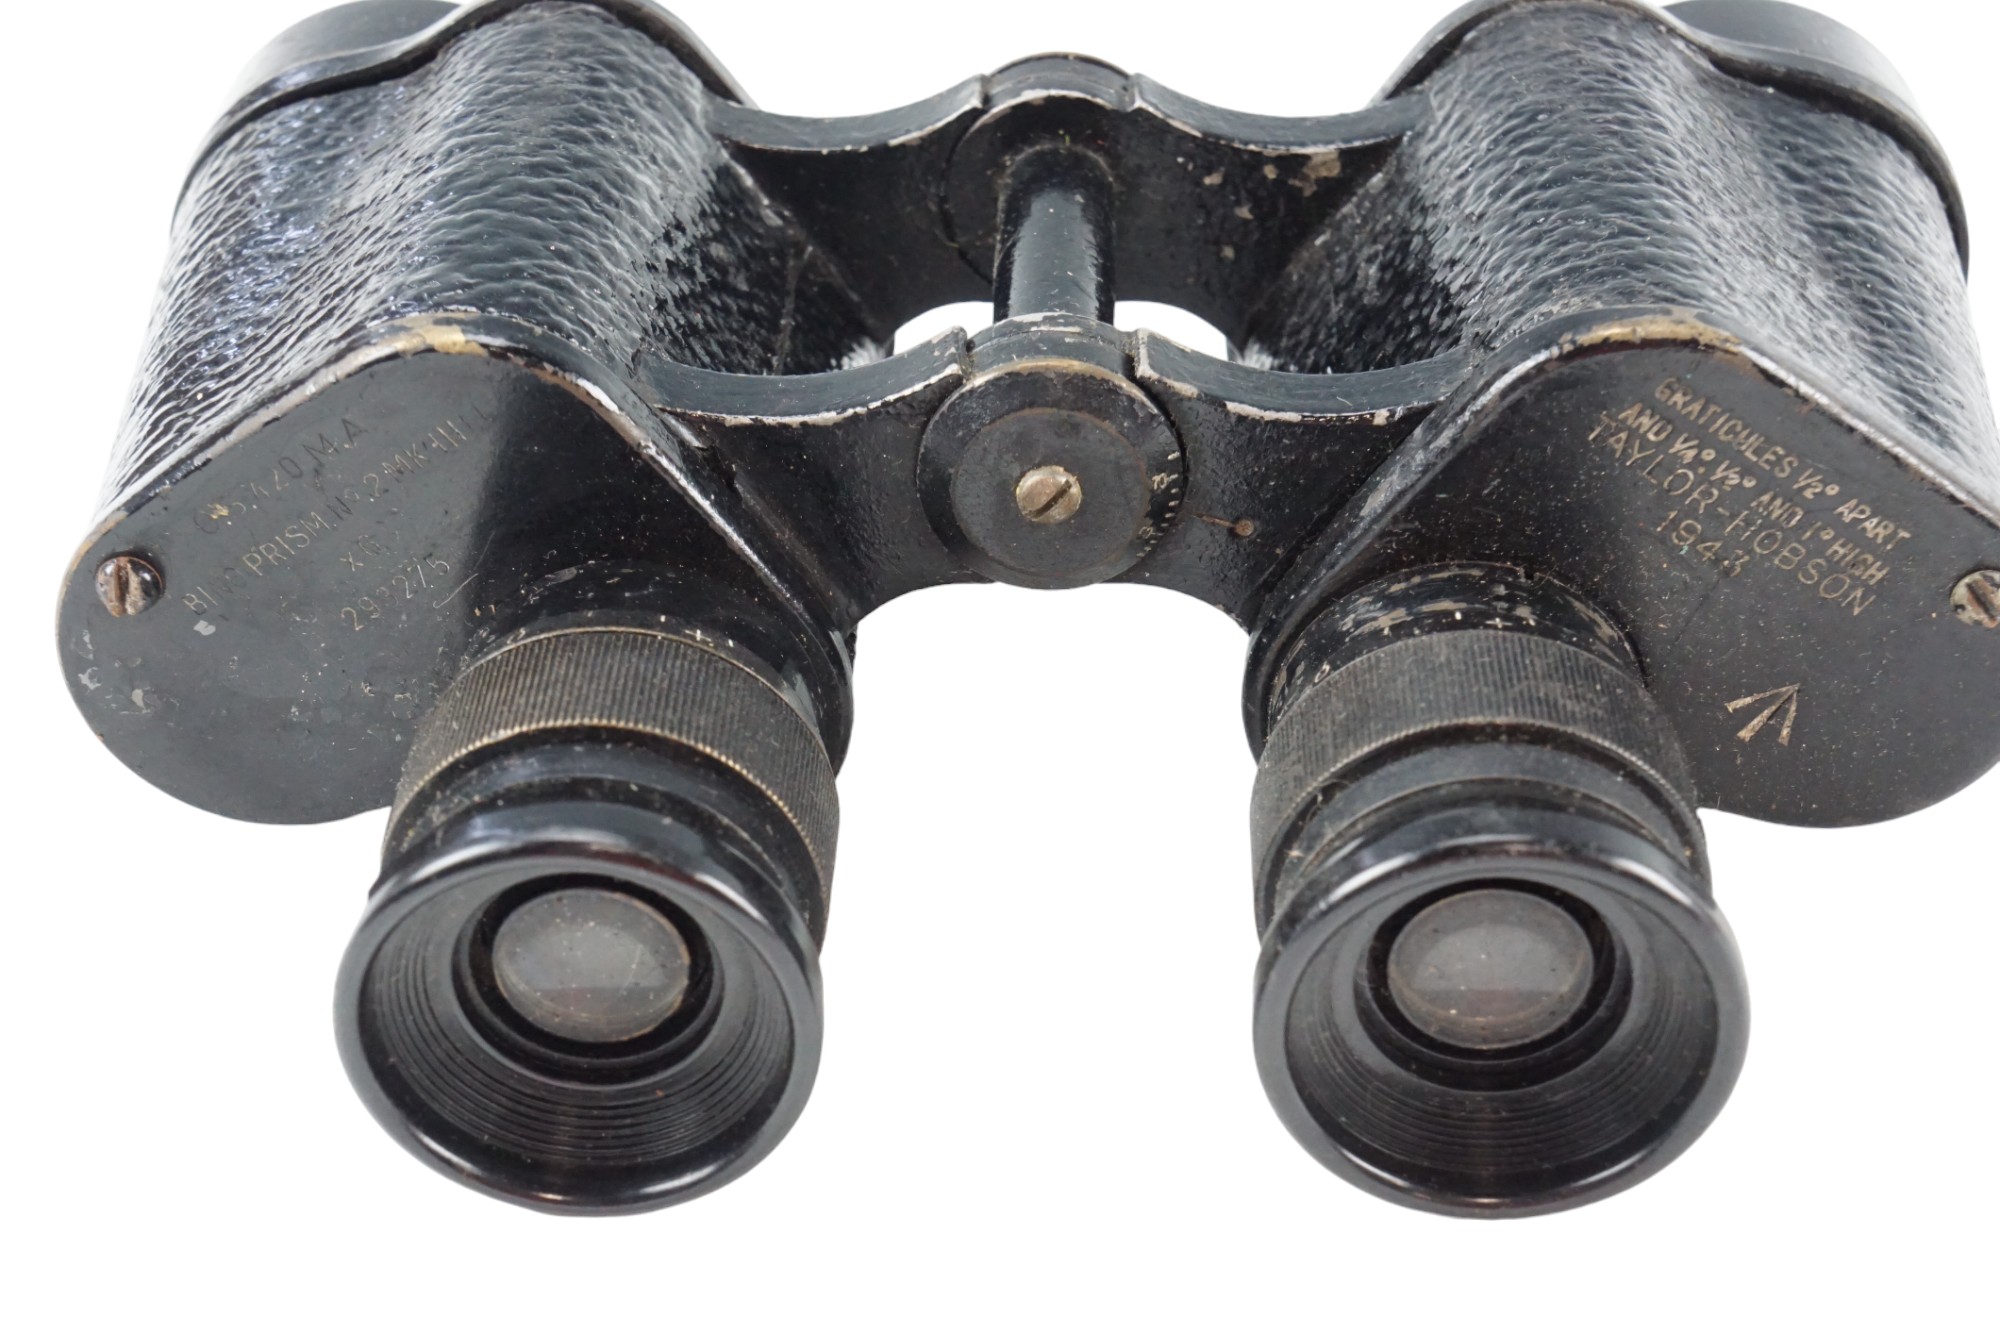 A set of 1943 British army No 2 Mk III binoculars in 1943 dated Pattern 1937 Webbing pouch - Image 2 of 3